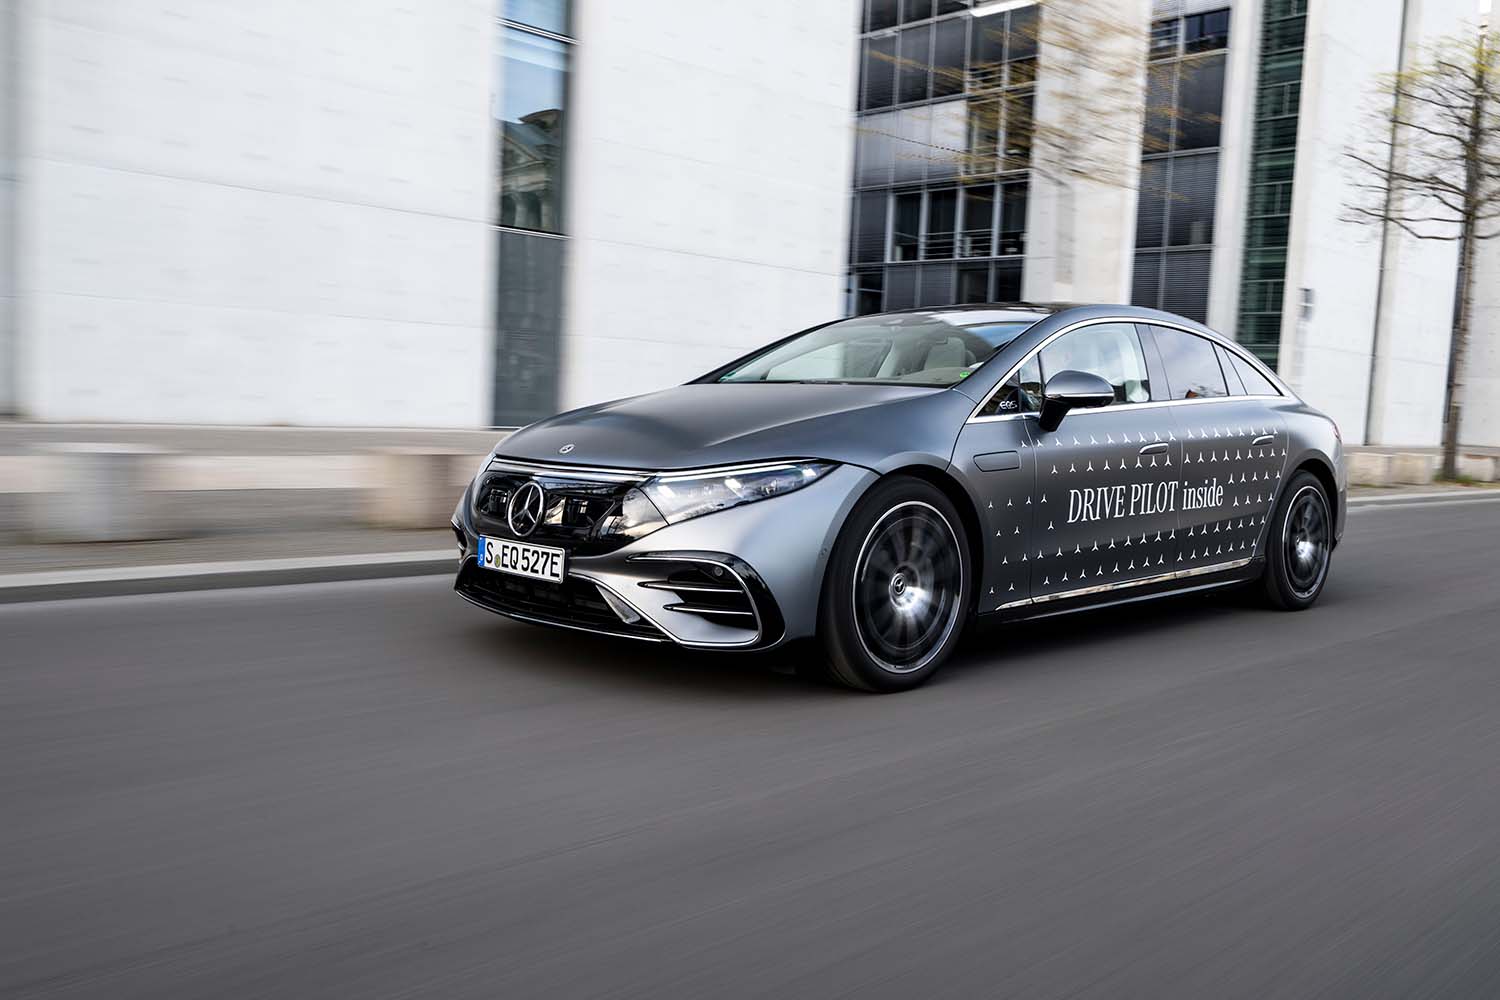 Mercedes Launches New Self-Driving Car in the US, Surpassing Tesla: What You Need to Know